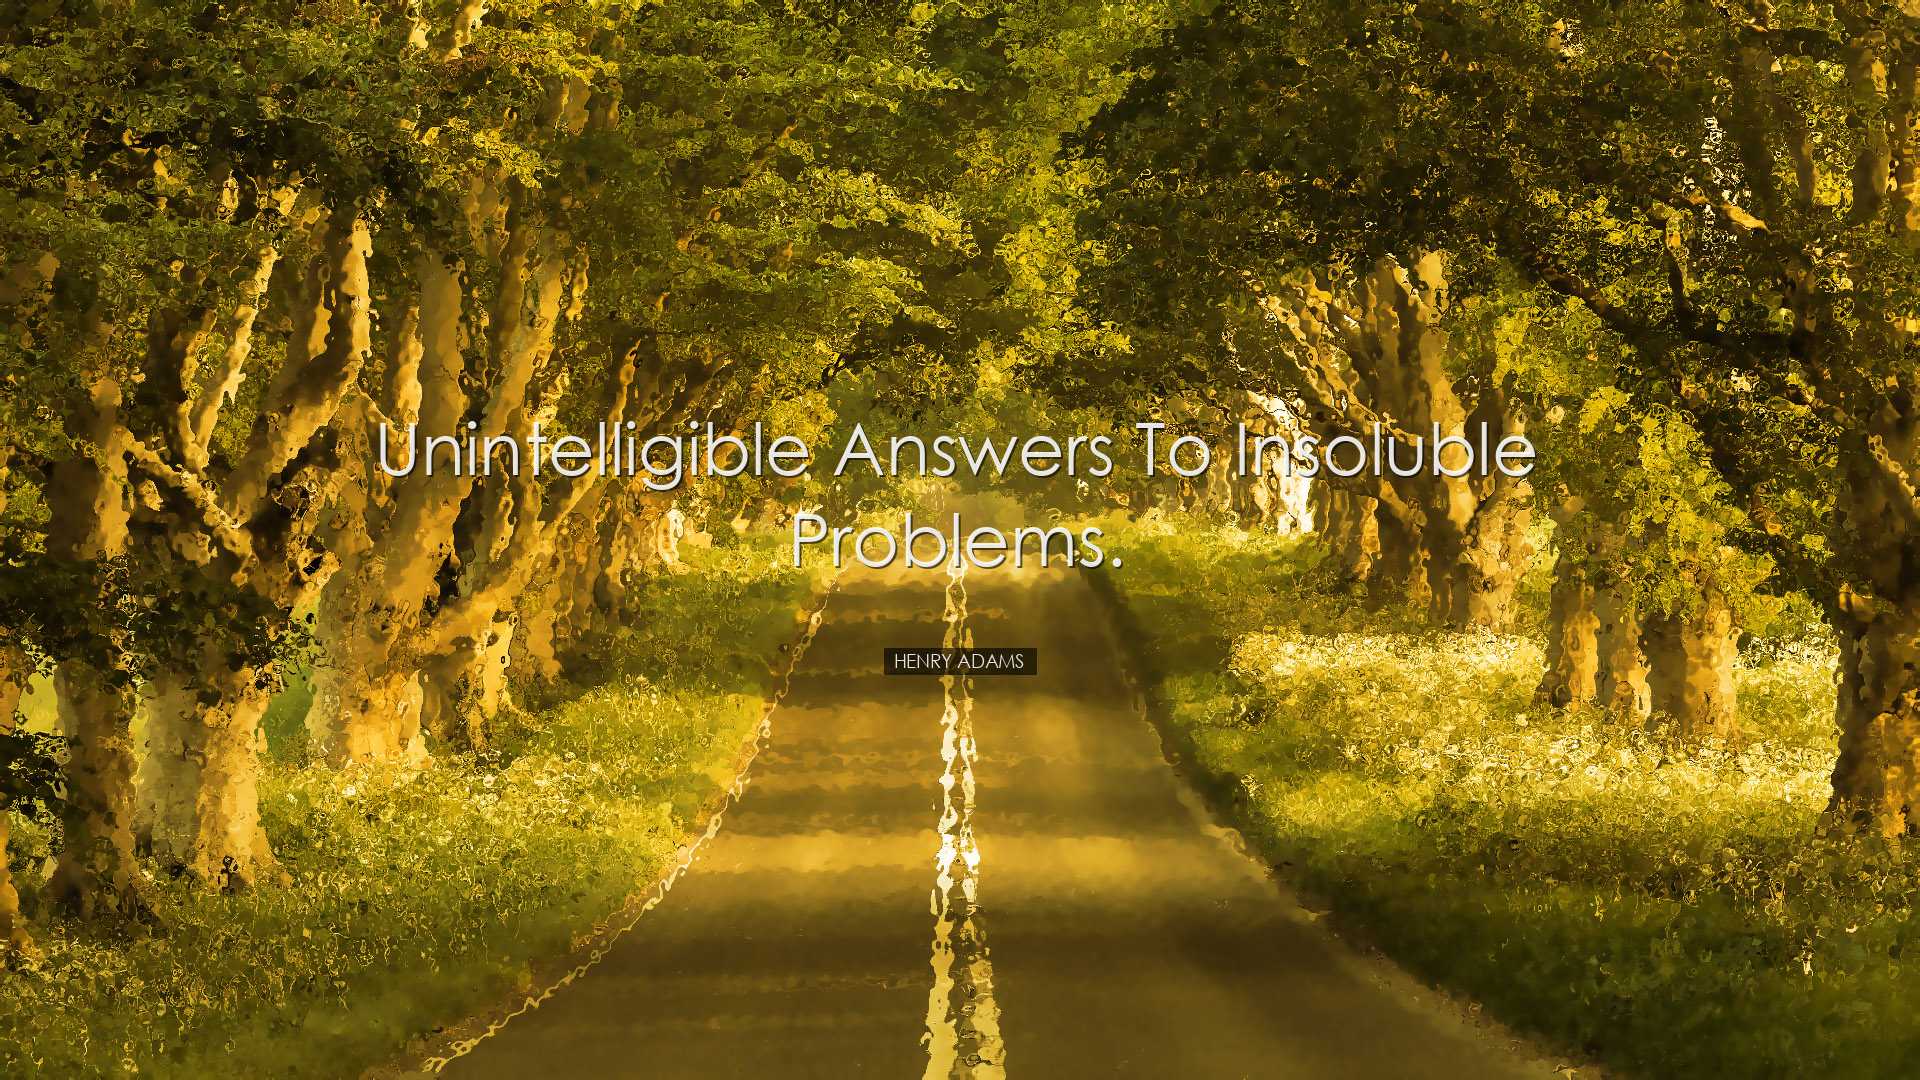 Unintelligible answers to insoluble problems. - Henry Adams